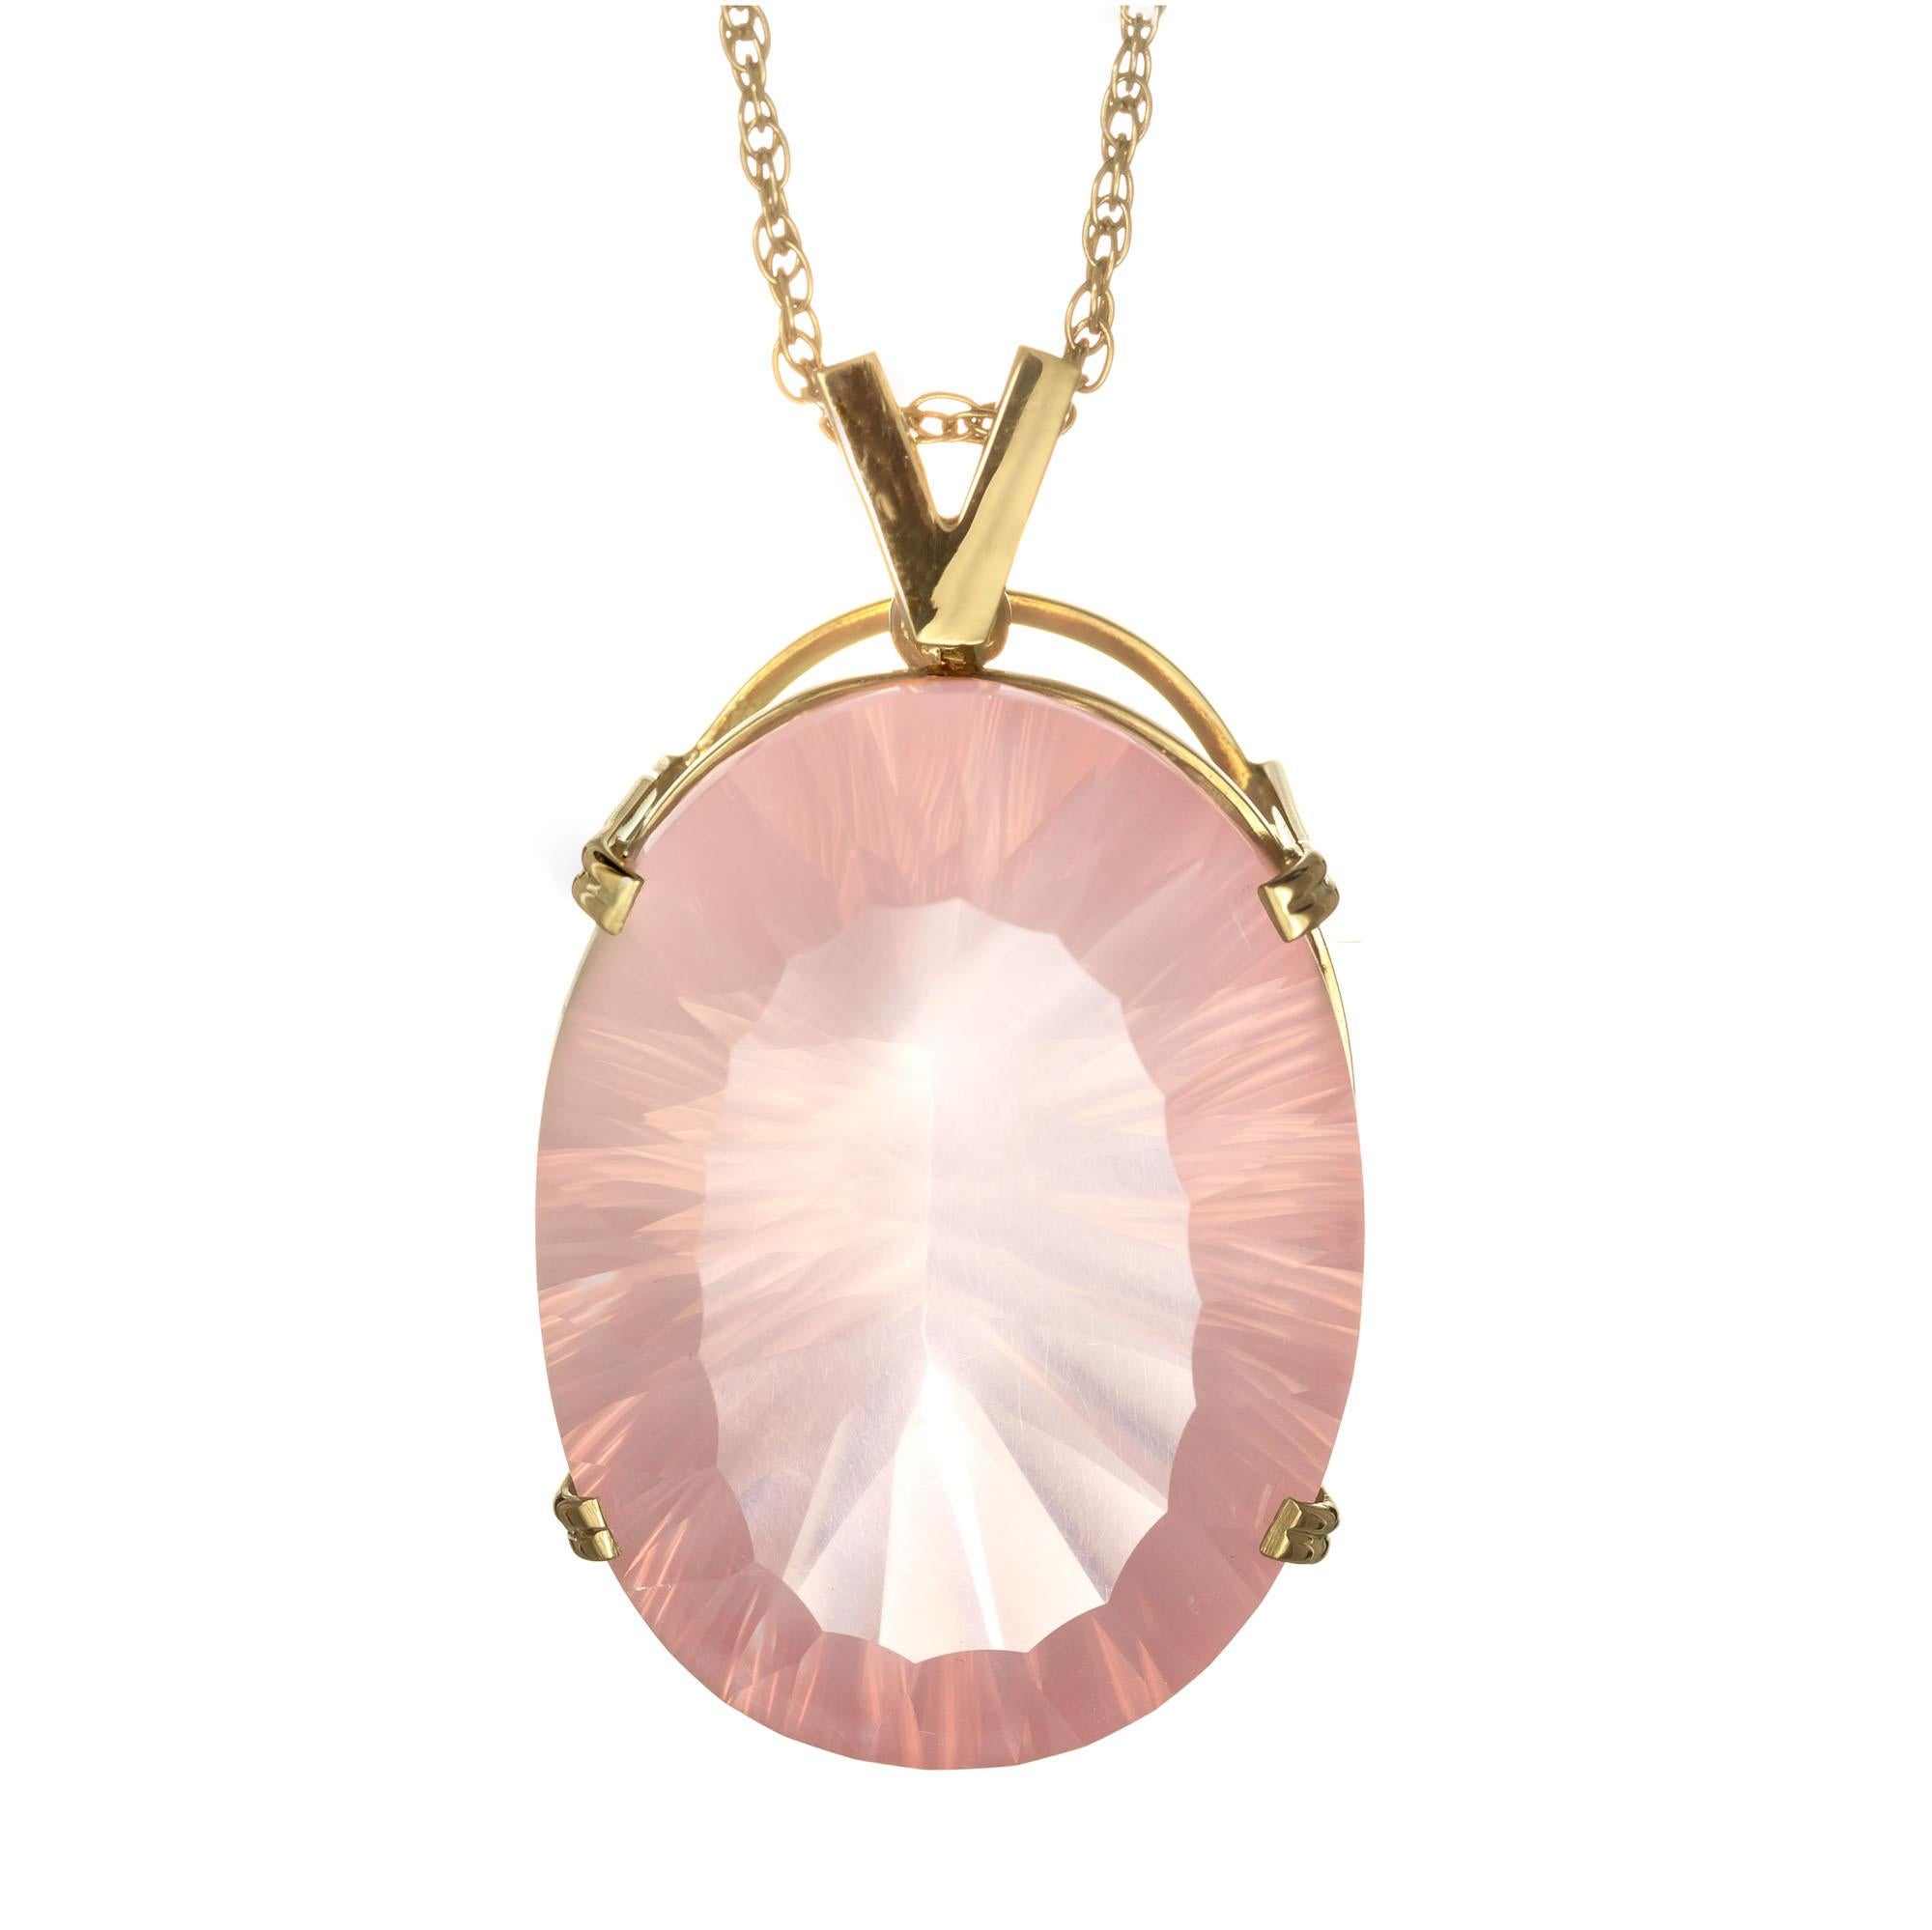 47.04 carat translucent pear milky rose oval quartz pendant necklace set in 14k yellow gold from the Peter Suchy Workshop. 

1 oval pink rose quartz, approx. 47.04cts
14k yellow gold 
Stamped: 14k
14.4 grams
Top to bottom: 37.1mm or 1 7/16